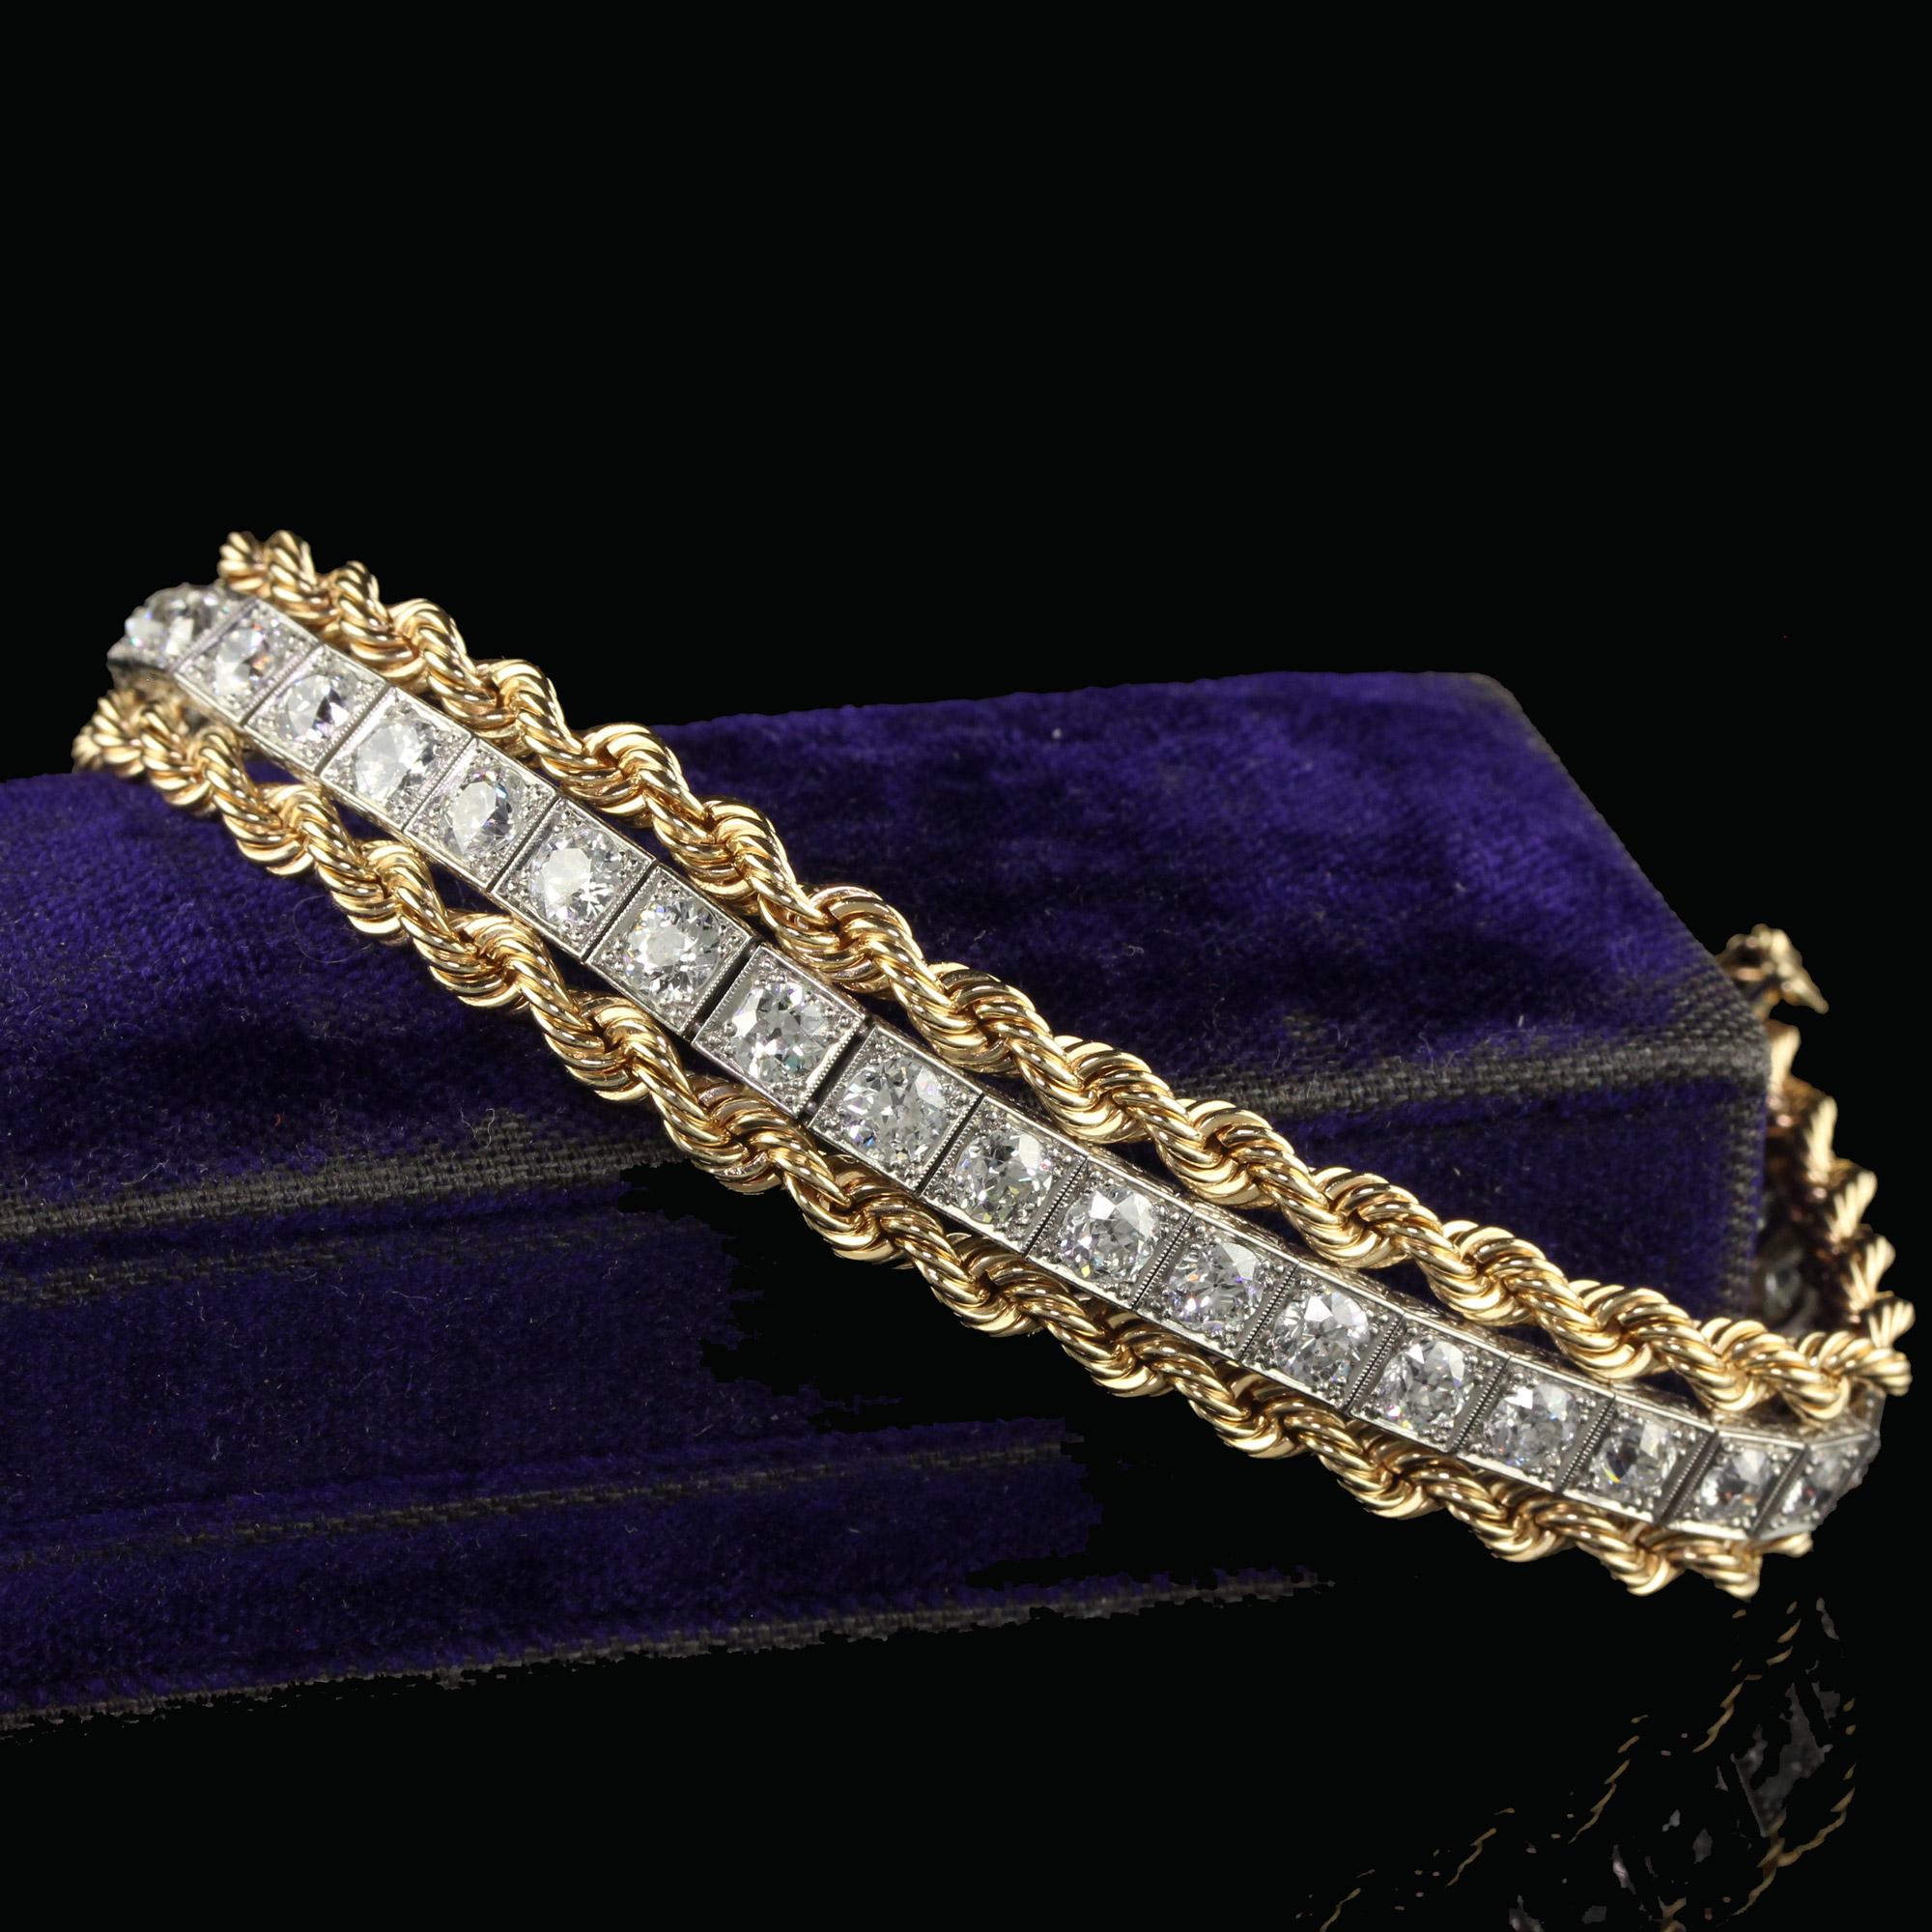 Beautiful Antique Retro Art Deco Platinum Yellow Gold Old Euro Diamond Bracelet. This gorgeous vintage estate old European diamond bracelet is crafted in platinum and yellow gold. This bracelet is a marriage of two different eras that came after one